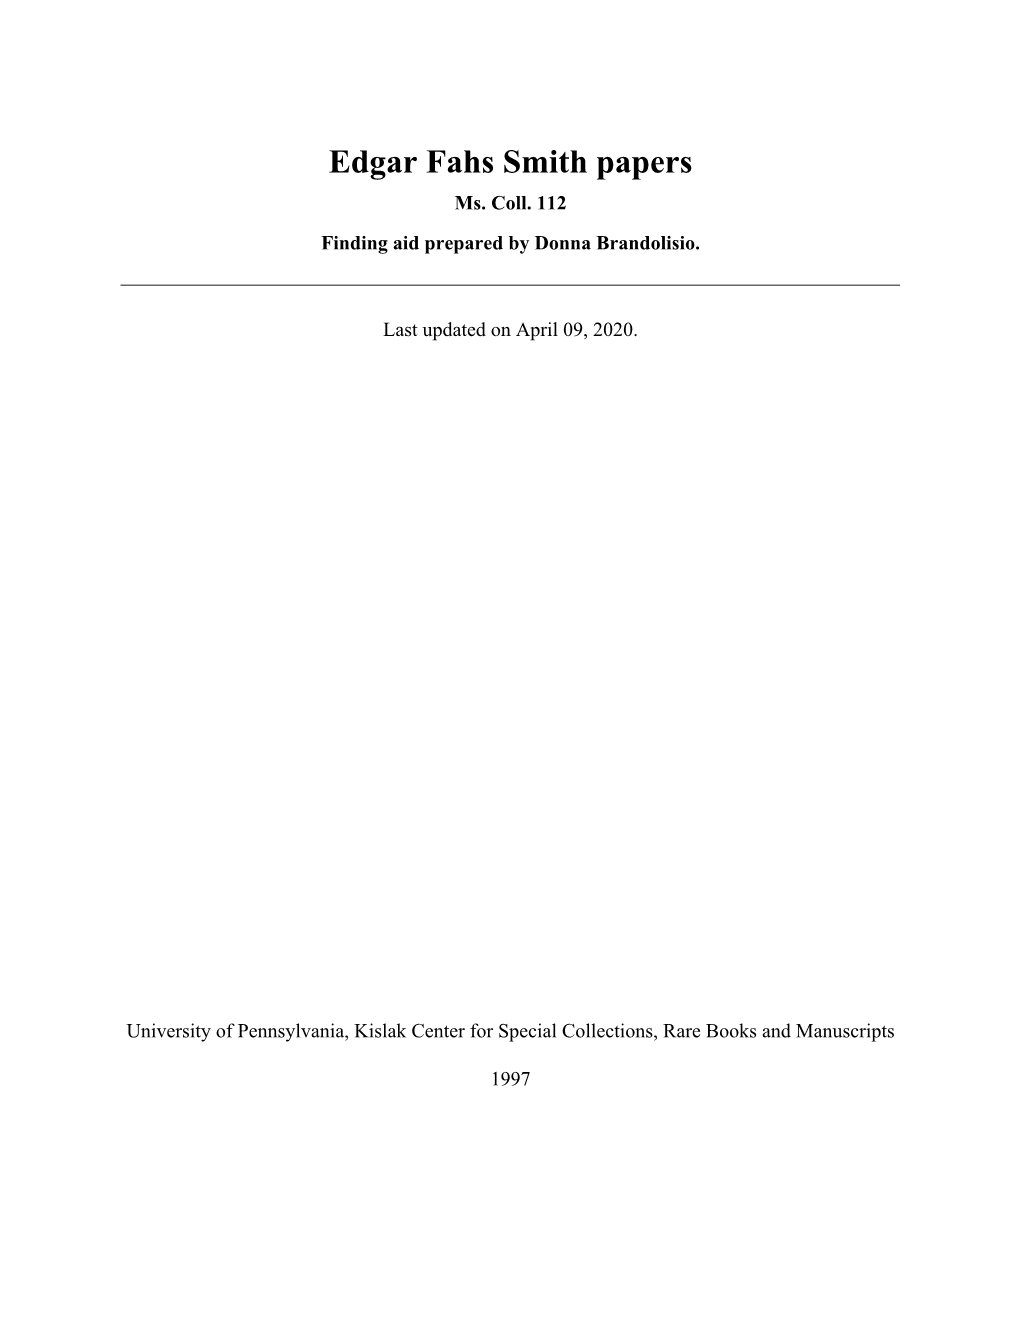 Edgar Fahs Smith Papers Ms